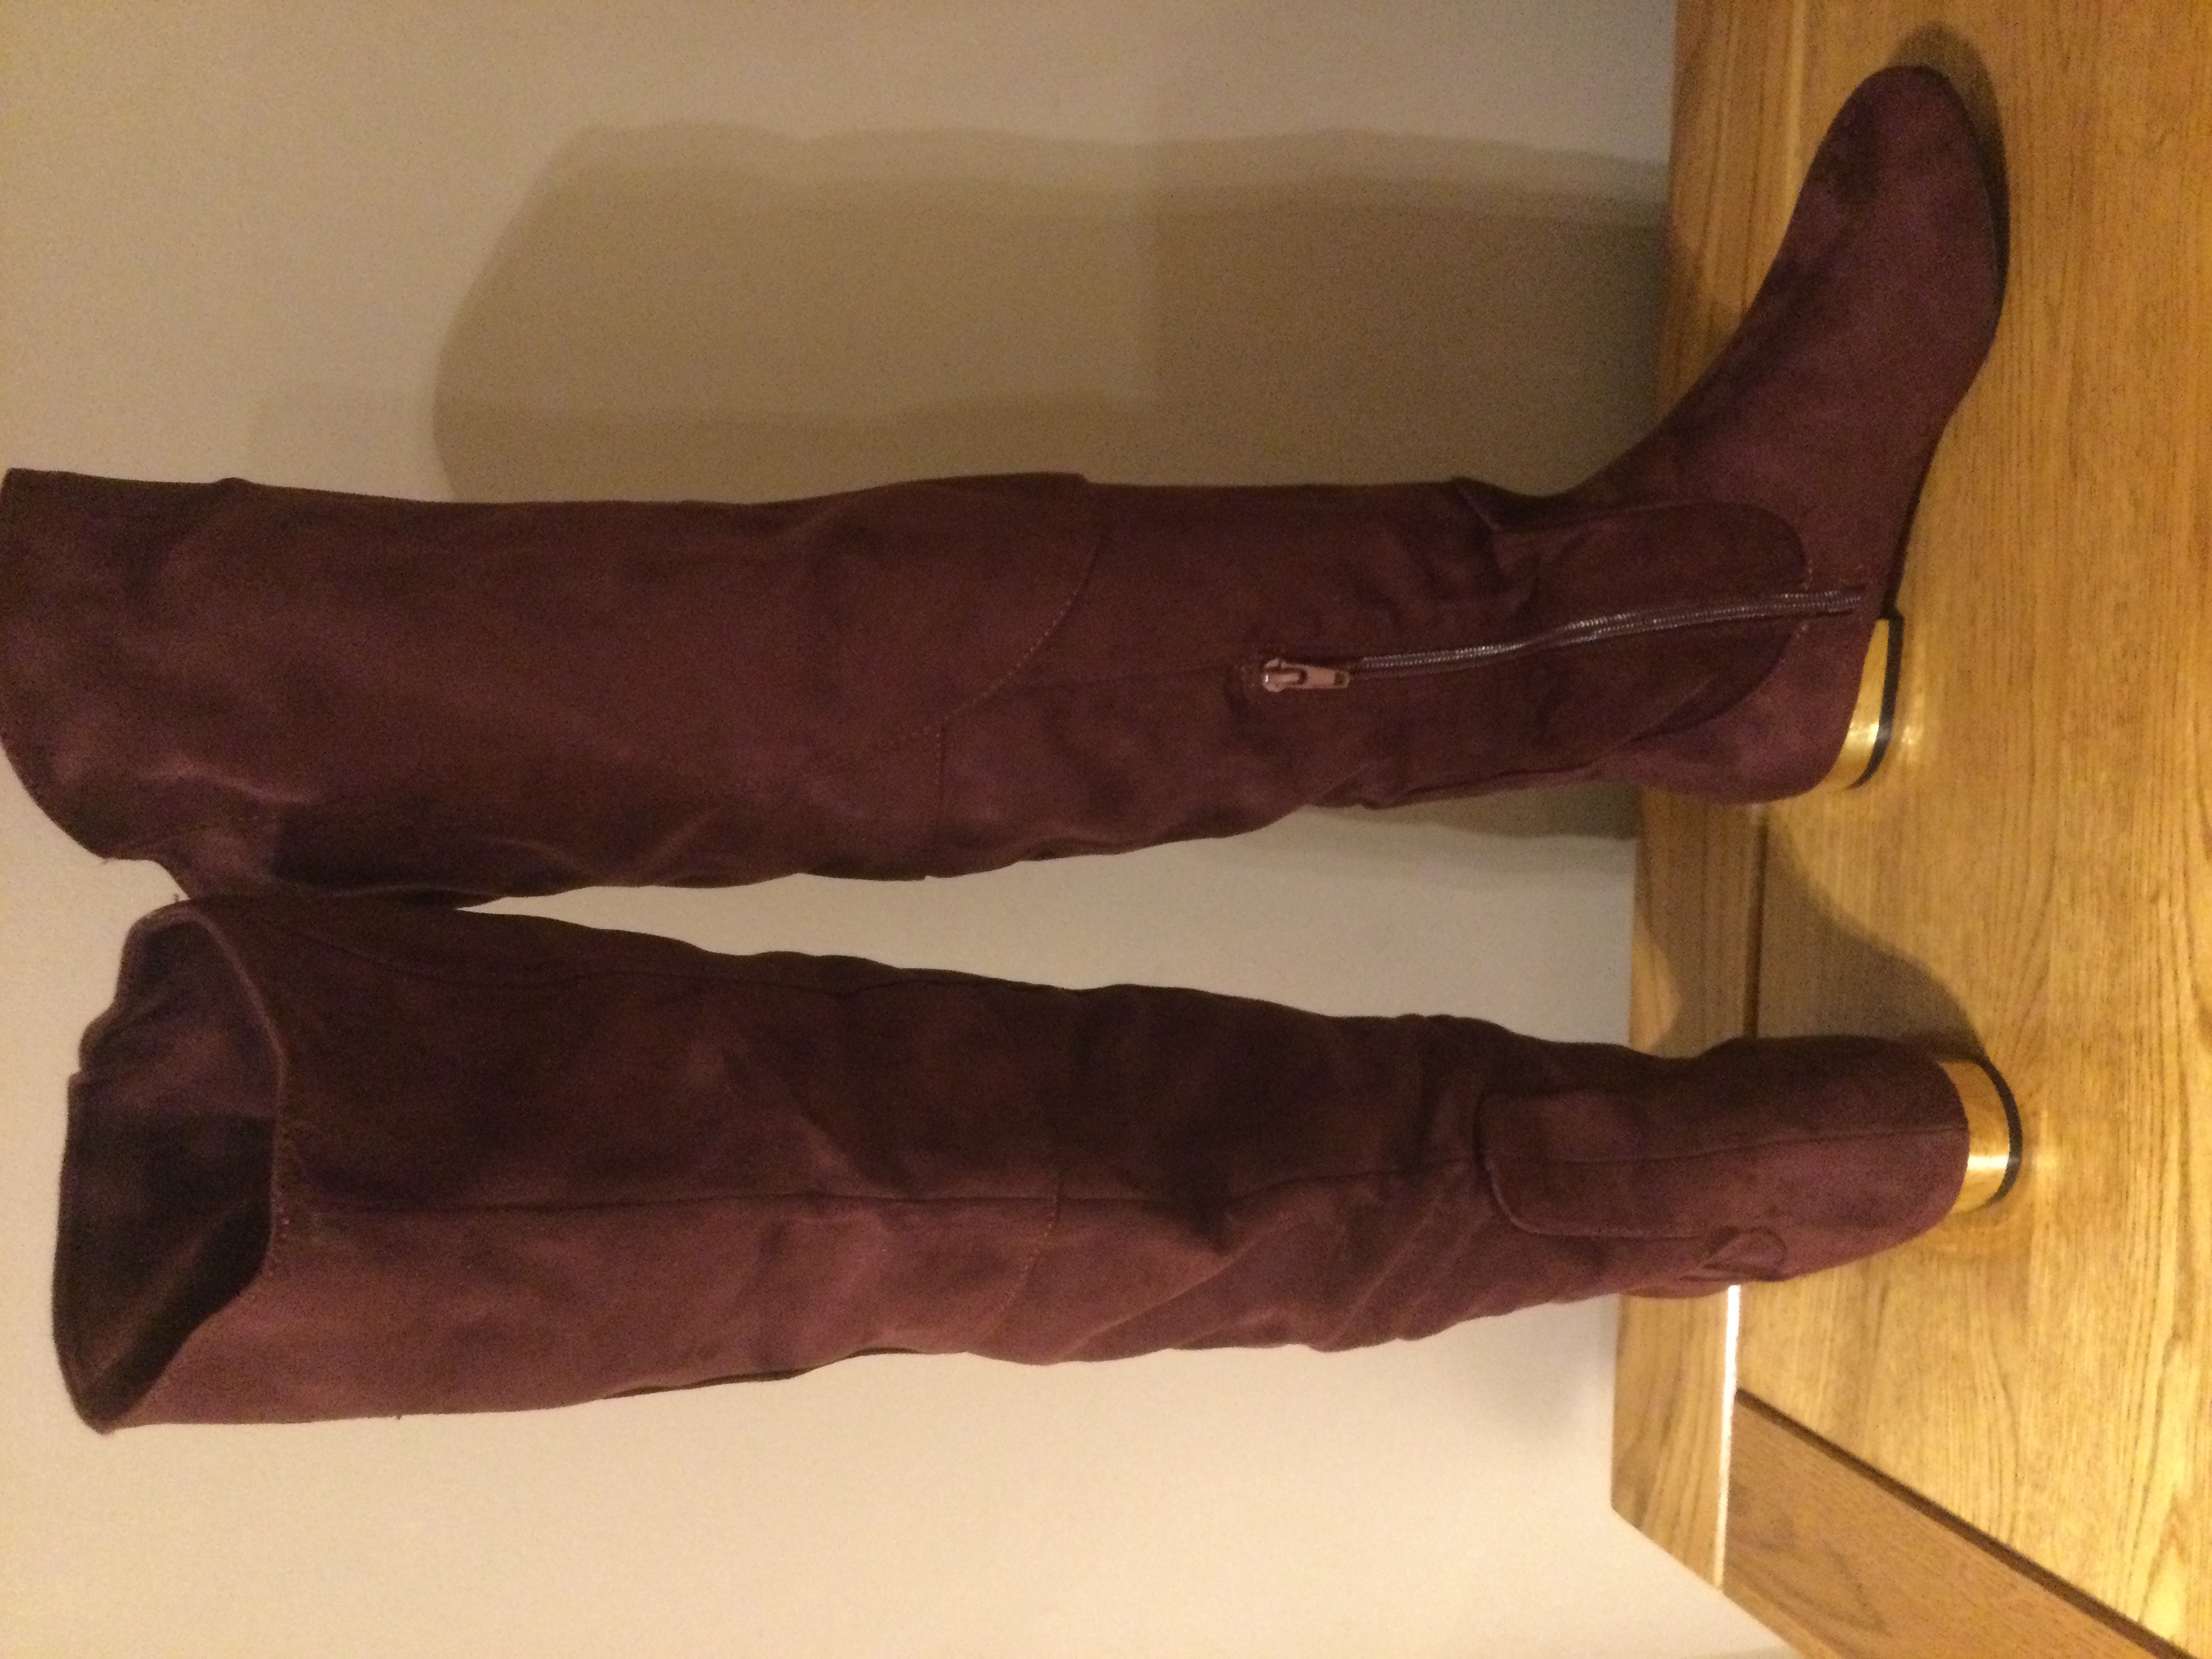 Dolcis “Katie” Long Boots, Low Heel, Size 4, Burgundy - New RRP £55.00 - Image 3 of 7